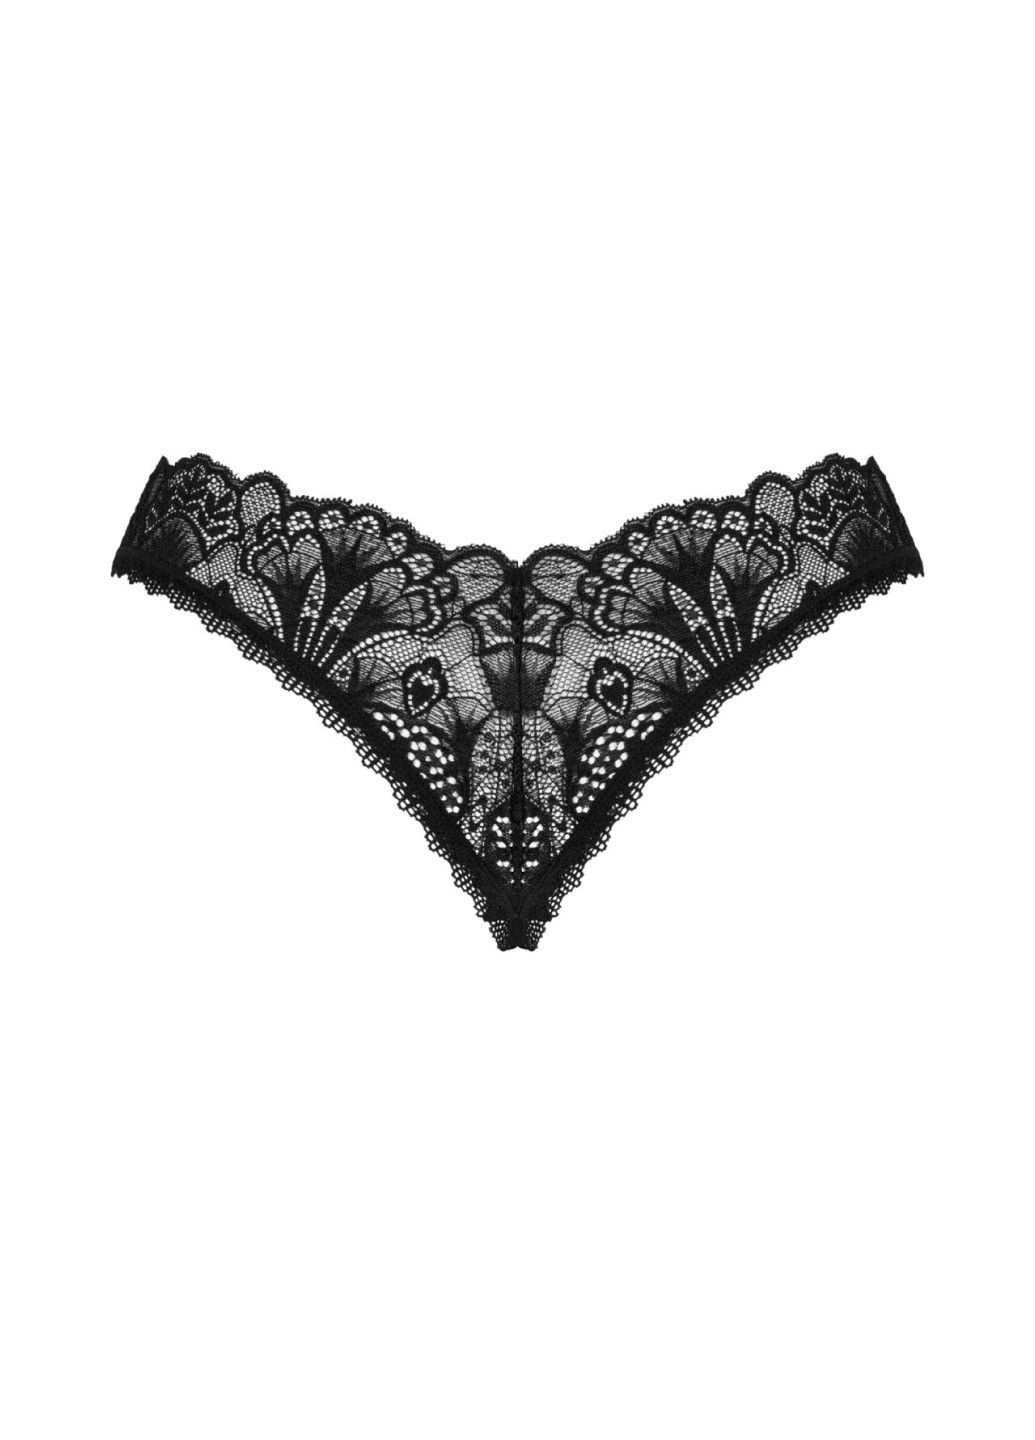 Donna Dream crotchless thong XL/2XL Obsessive (275927816)